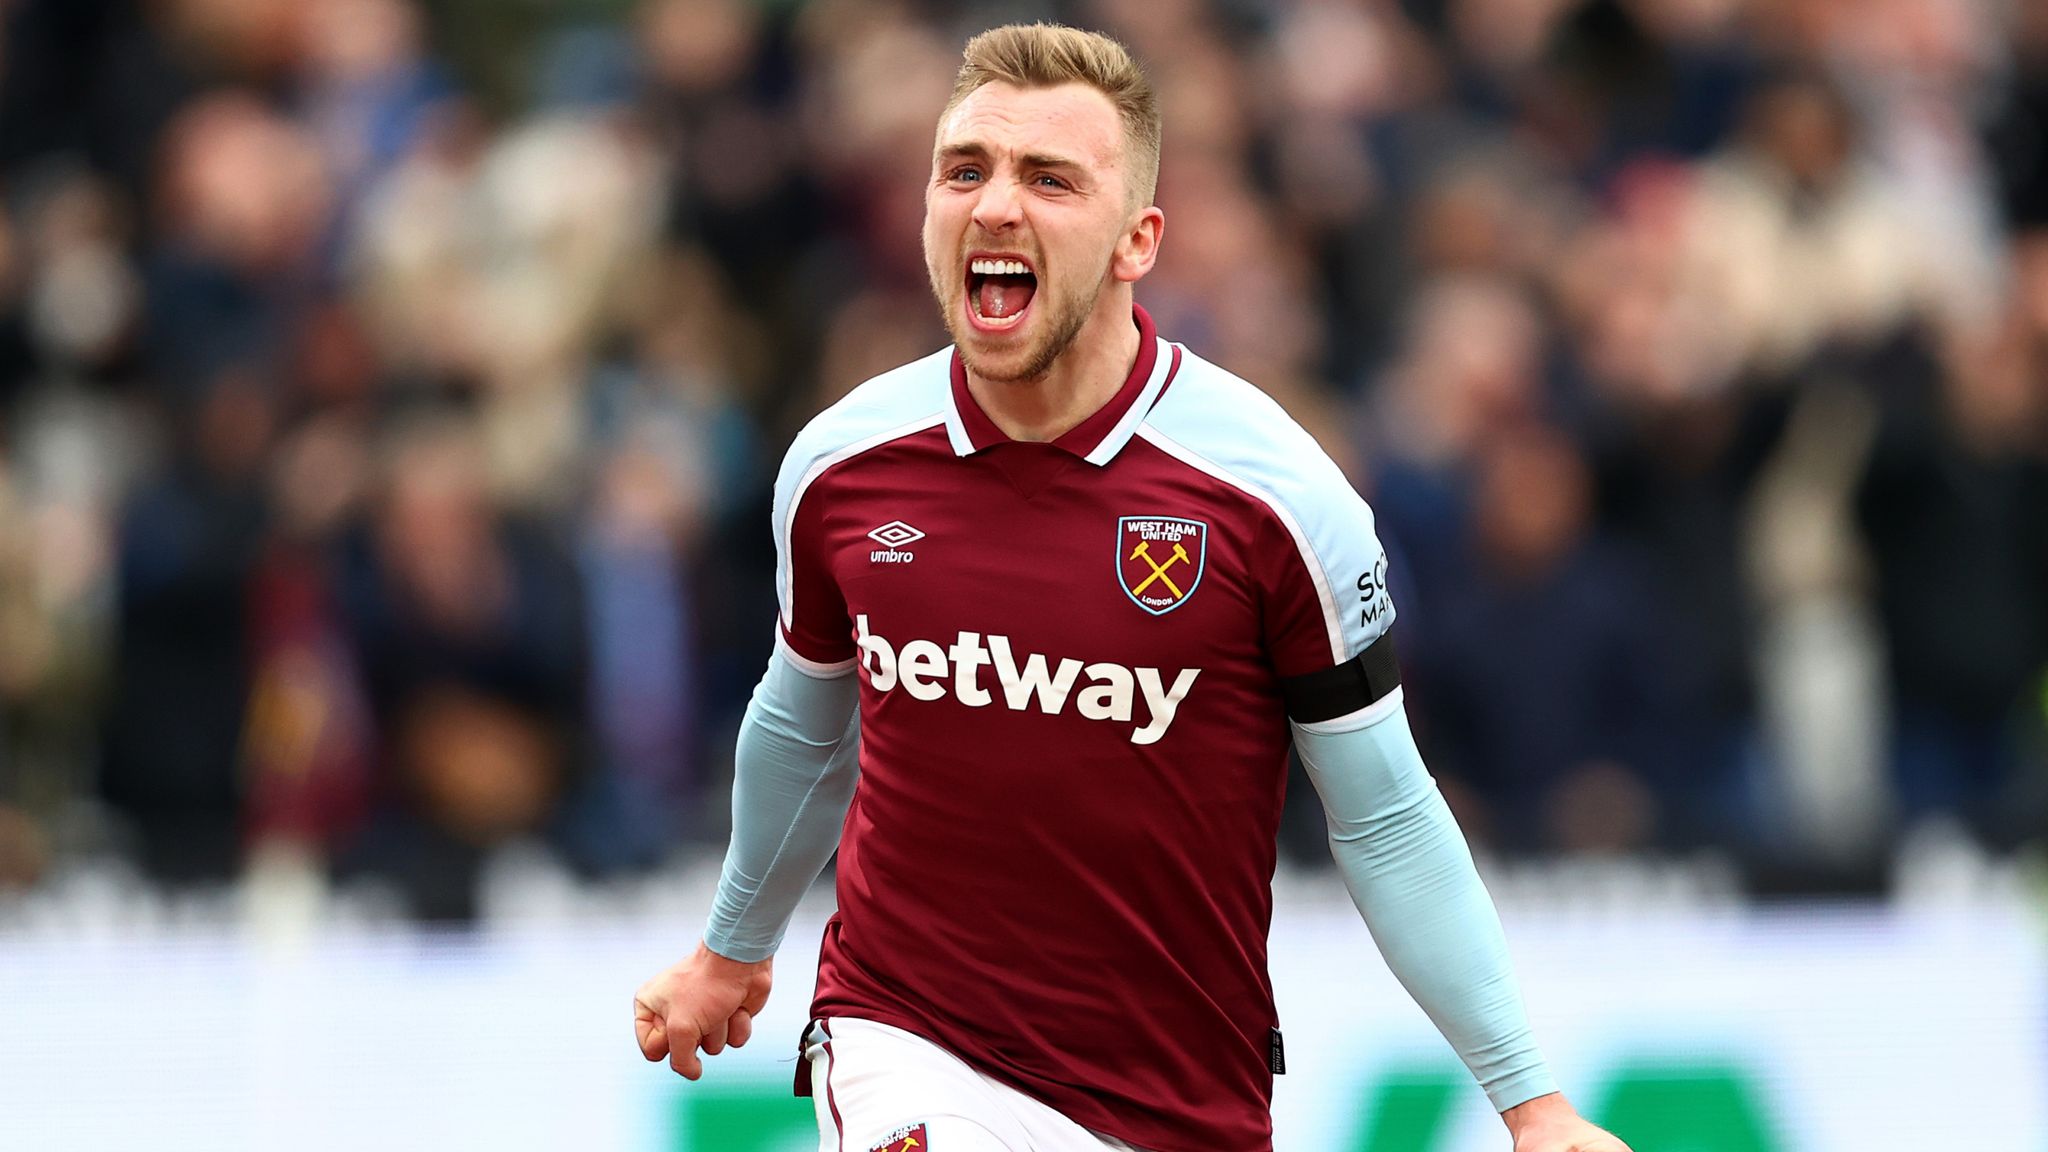 West Ham sits in 6th position as they beat 10-man Everton